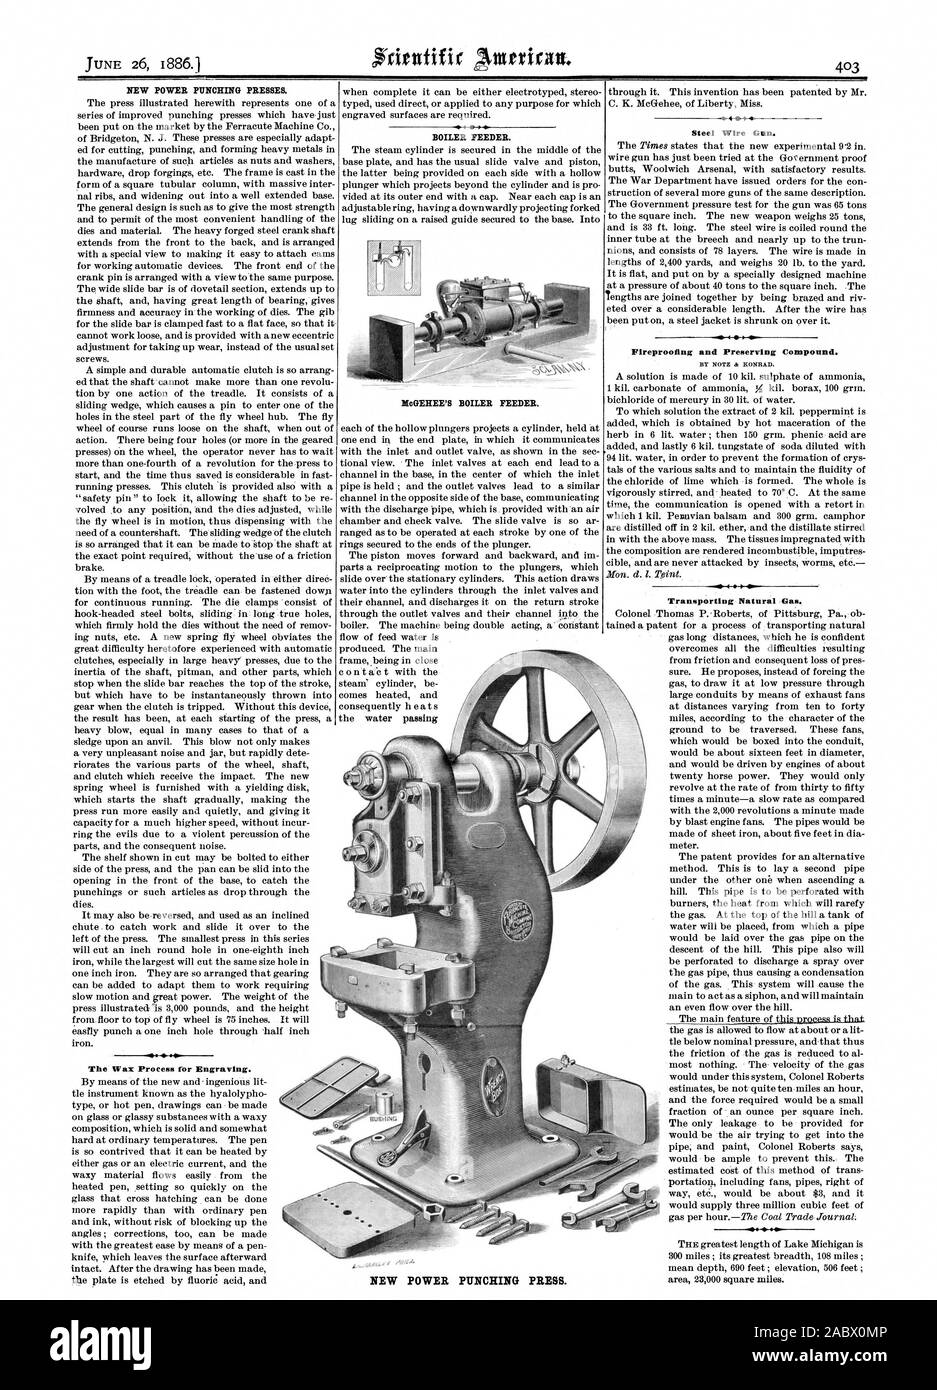 NEW POWER PUNCHING PRESSES. The Wax Process for Engraving. BOILER FEEDER. HoGEHEE'S BOILER FEEDER. Steel Wire Gun. Fireproofing and Preserving Compound. Transporting Natural Gas. NEW POWER PUNCHING PRESS., scientific american, 1886-06-26 Stock Photo